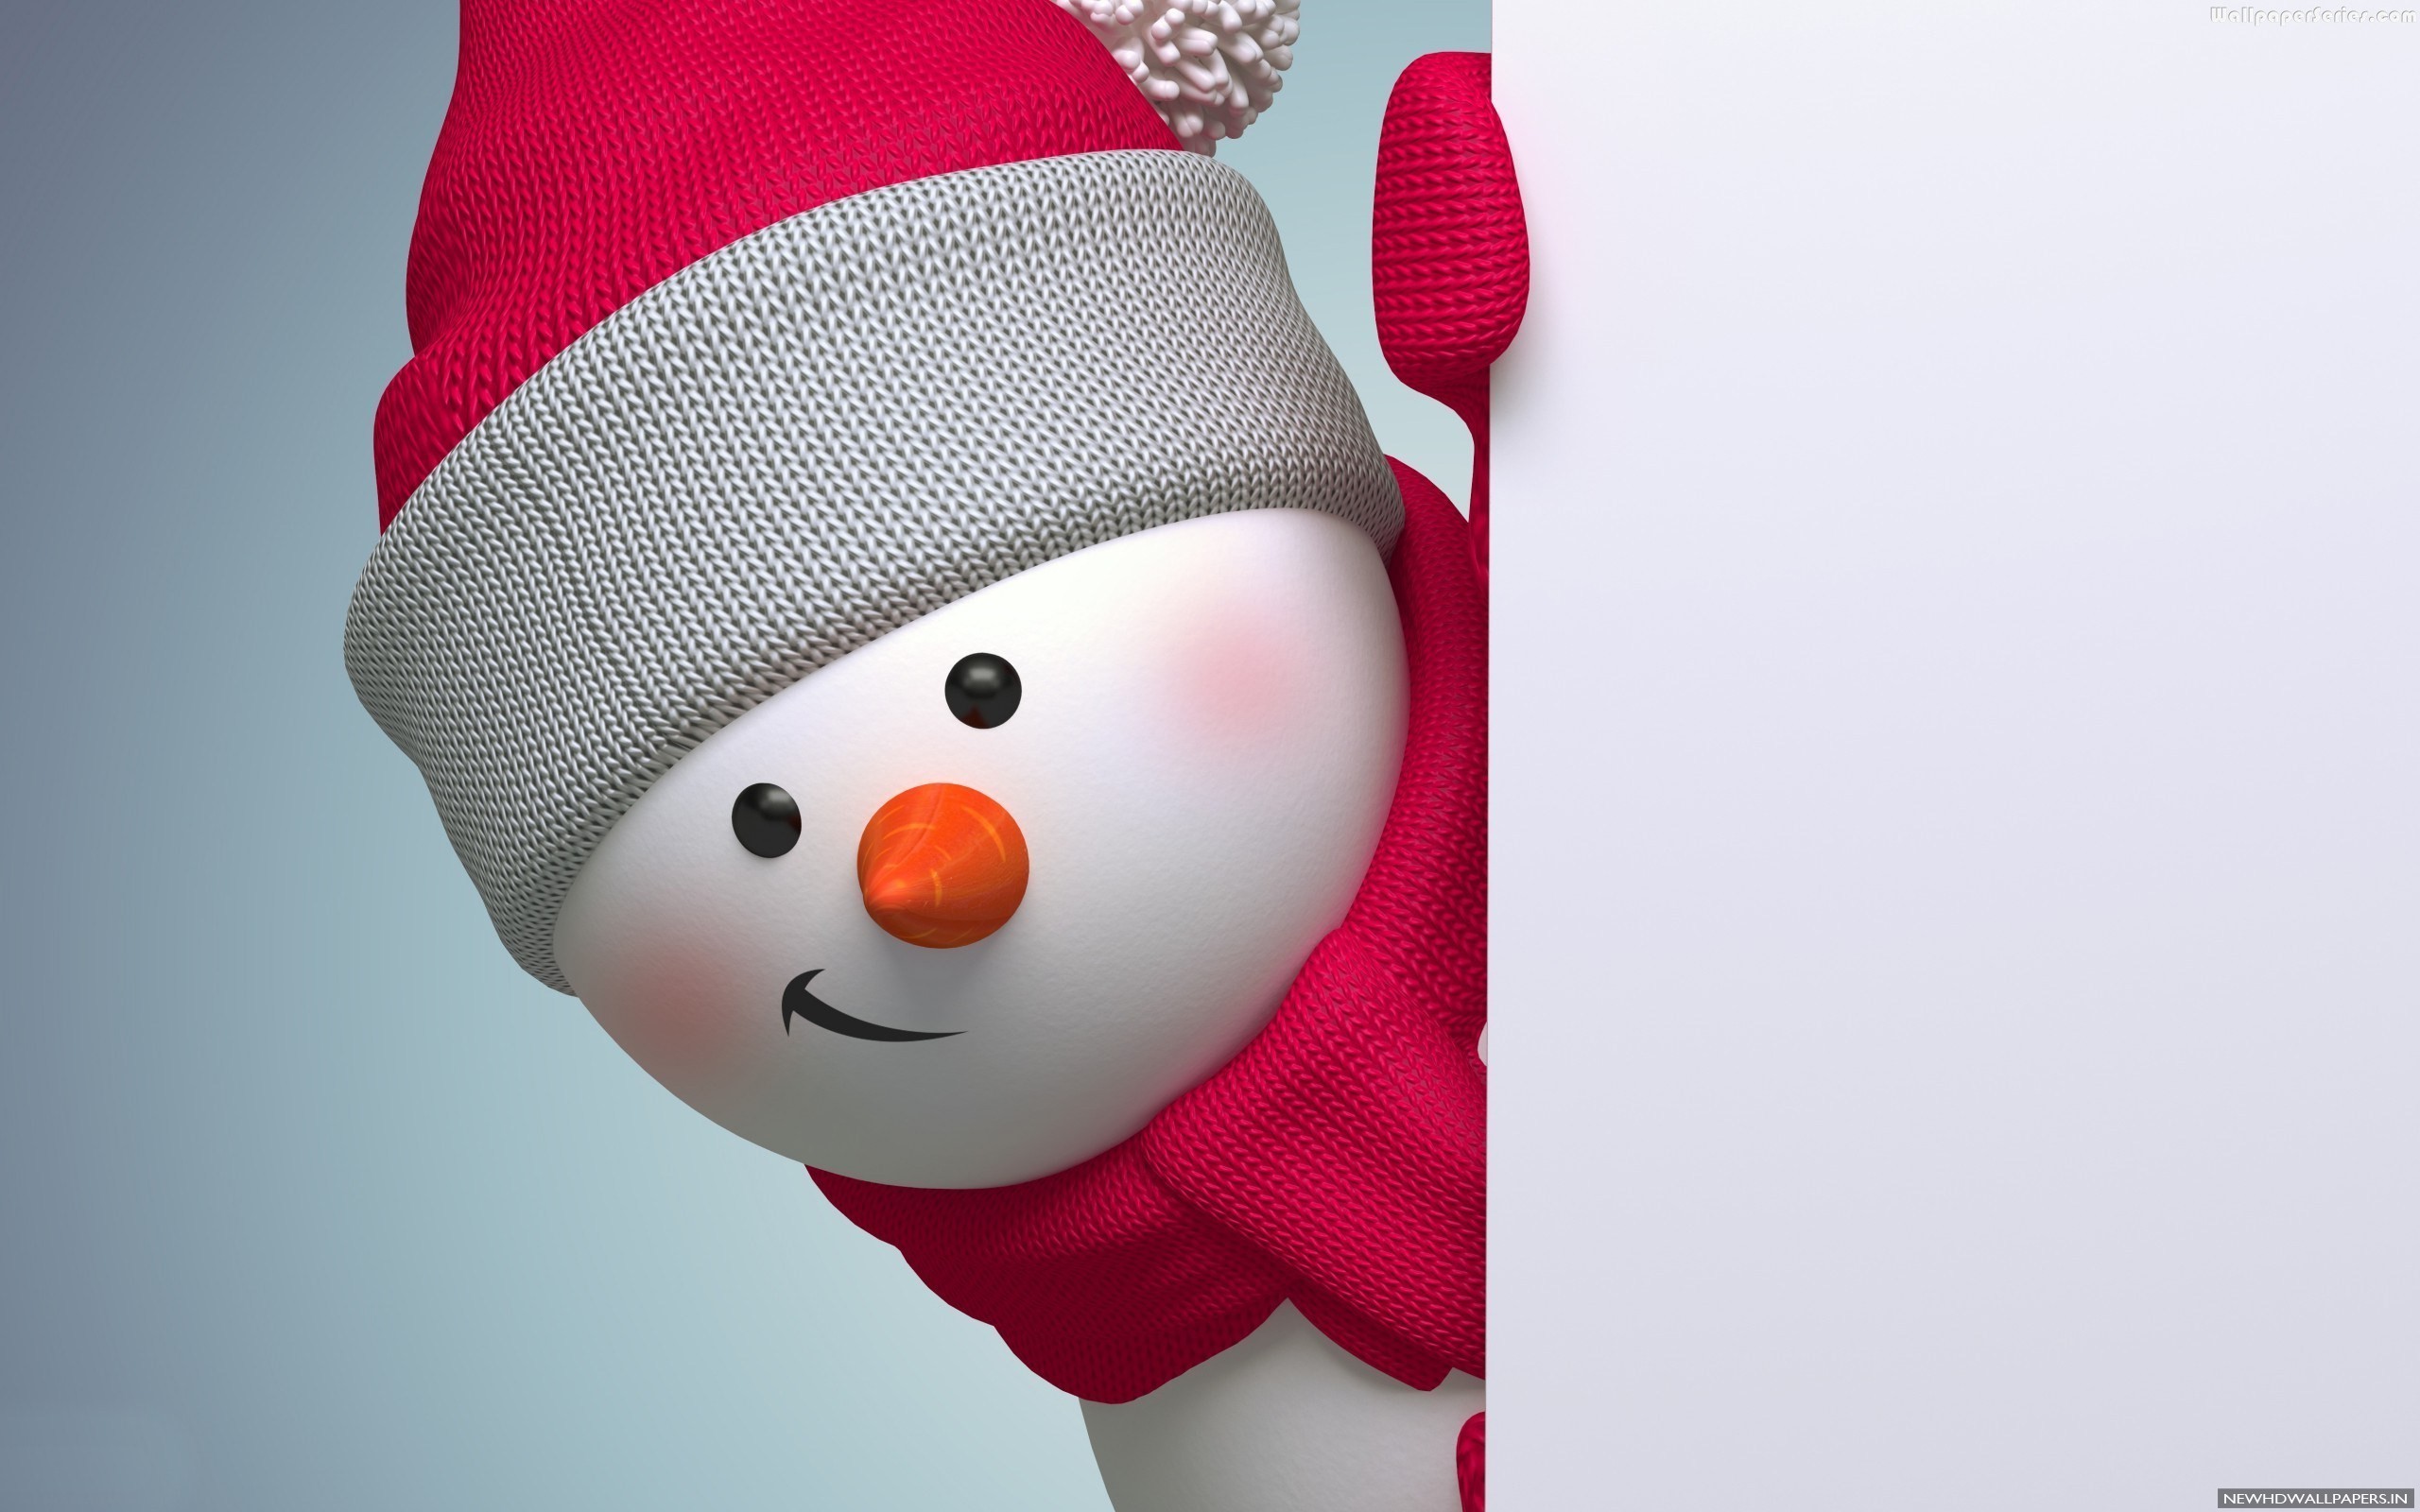 Cute Merry Christmas Wallpaper For Iphone - Cute Christmas Wallpaper Hd - HD Wallpaper 